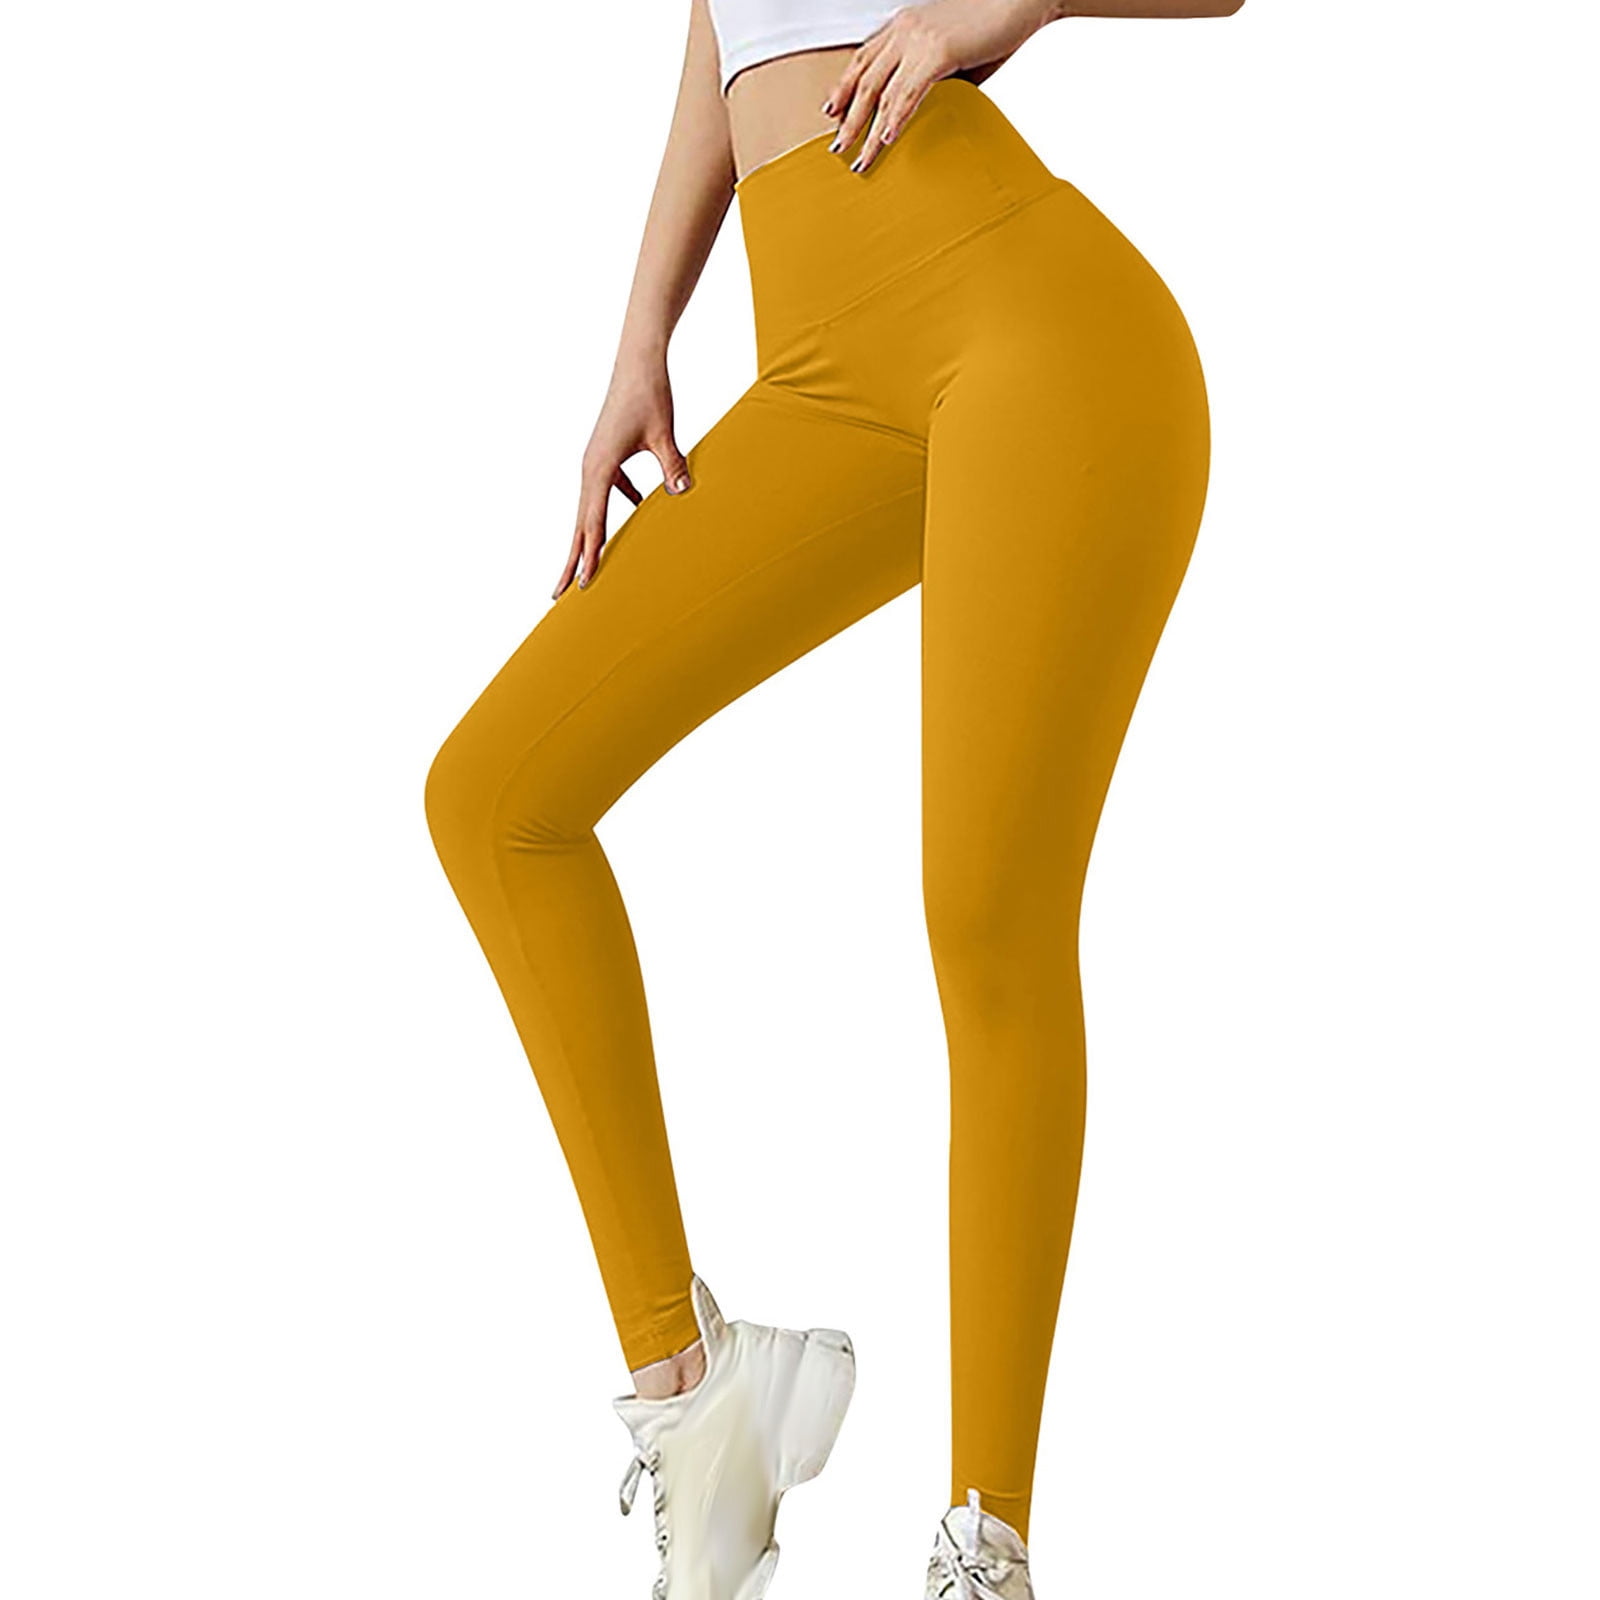 YYDGH Womens High Waisted Yoga Pants Bow-Knot Tie Workout Leggings Ruched  Butt Lifting Stretch Sport Running Tights Yellow L 